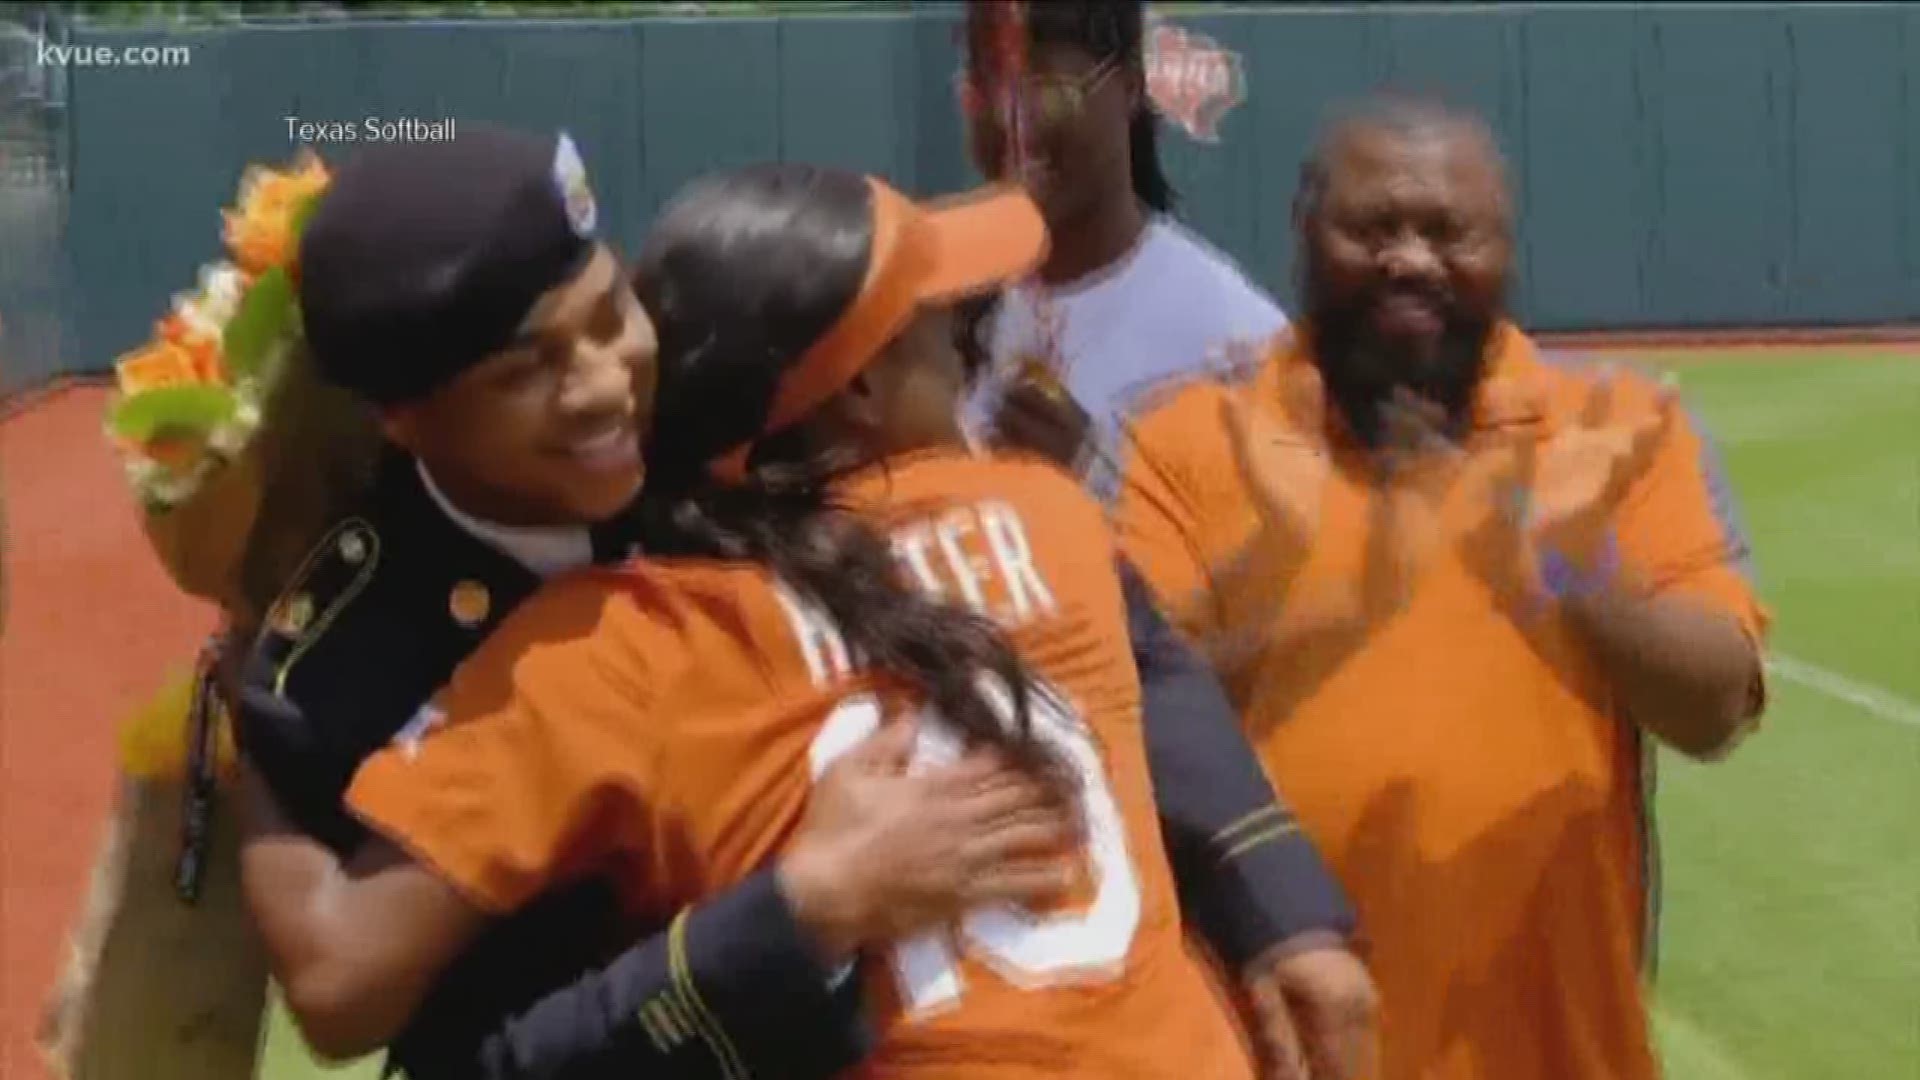 One Texas Longhorn had a military reunion on the softball field during Senior Day.